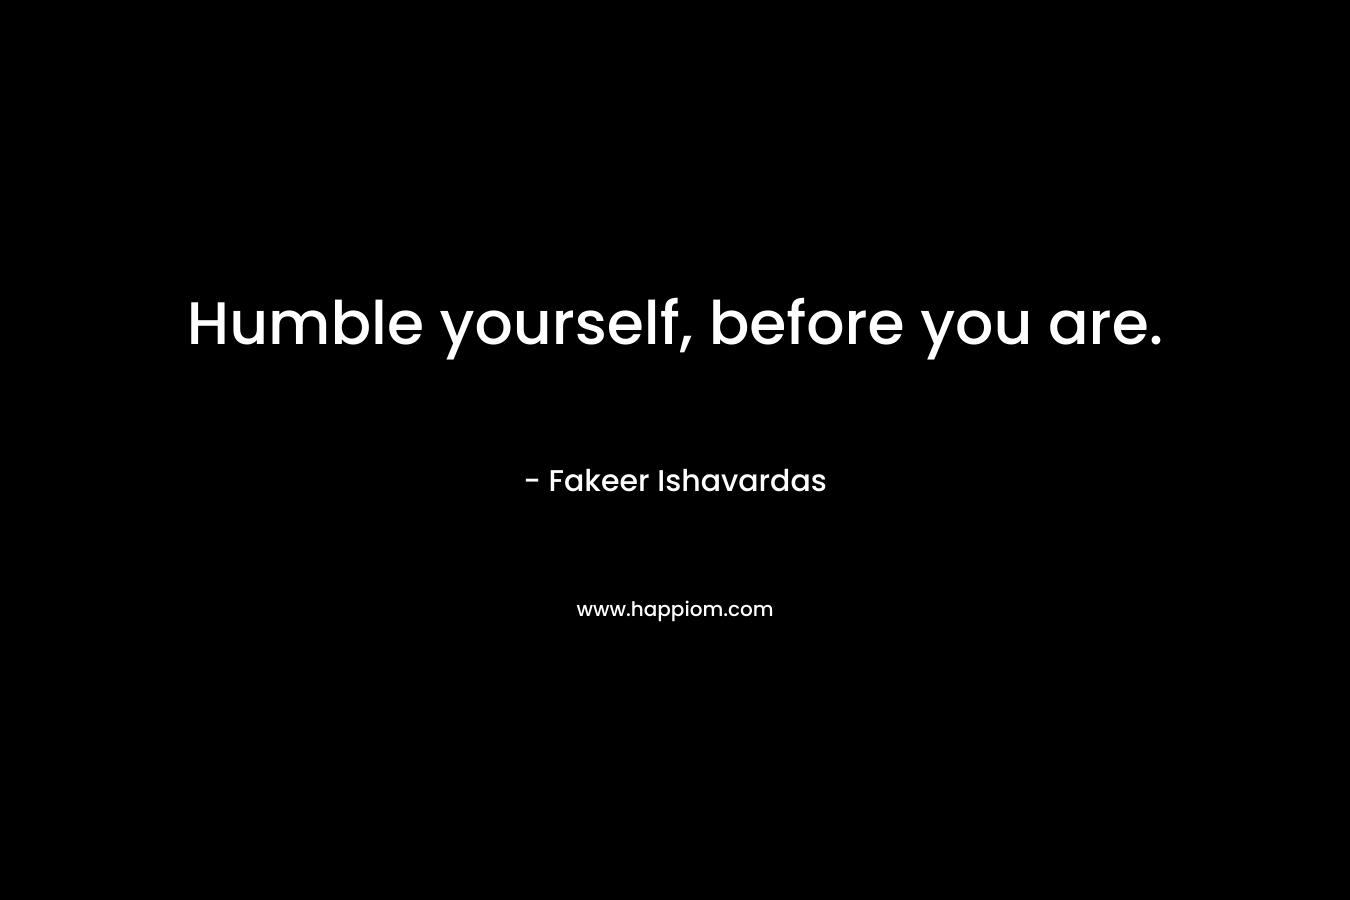 Humble yourself, before you are.